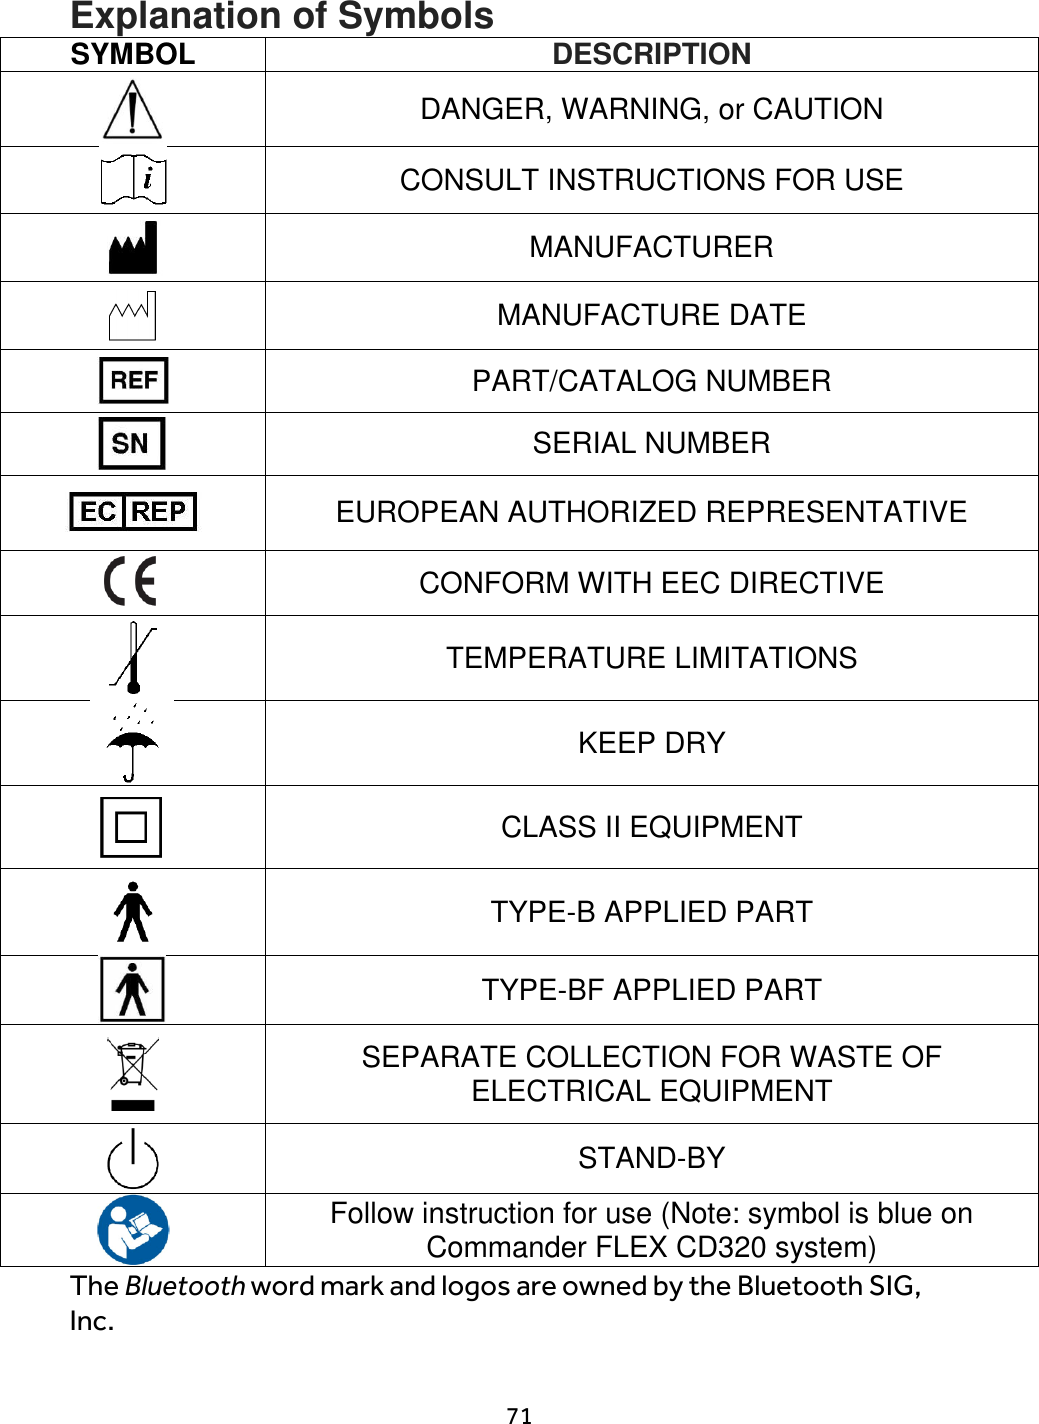                      71 Explanation of Symbols SYMBOL DESCRIPTION  DANGER, WARNING, or CAUTION  CONSULT INSTRUCTIONS FOR USE  MANUFACTURER   MANUFACTURE DATE  PART/CATALOG NUMBER  SERIAL NUMBER  EUROPEAN AUTHORIZED REPRESENTATIVE  CONFORM WITH EEC DIRECTIVE  TEMPERATURE LIMITATIONS  KEEP DRY  CLASS II EQUIPMENT  TYPE-B APPLIED PART  TYPE-BF APPLIED PART  SEPARATE COLLECTION FOR WASTE OF ELECTRICAL EQUIPMENT  STAND-BY  Follow instruction for use (Note: symbol is blue on Commander FLEX CD320 system) The Bluetooth word mark and logos are owned by the Bluetooth SIG, Inc.  